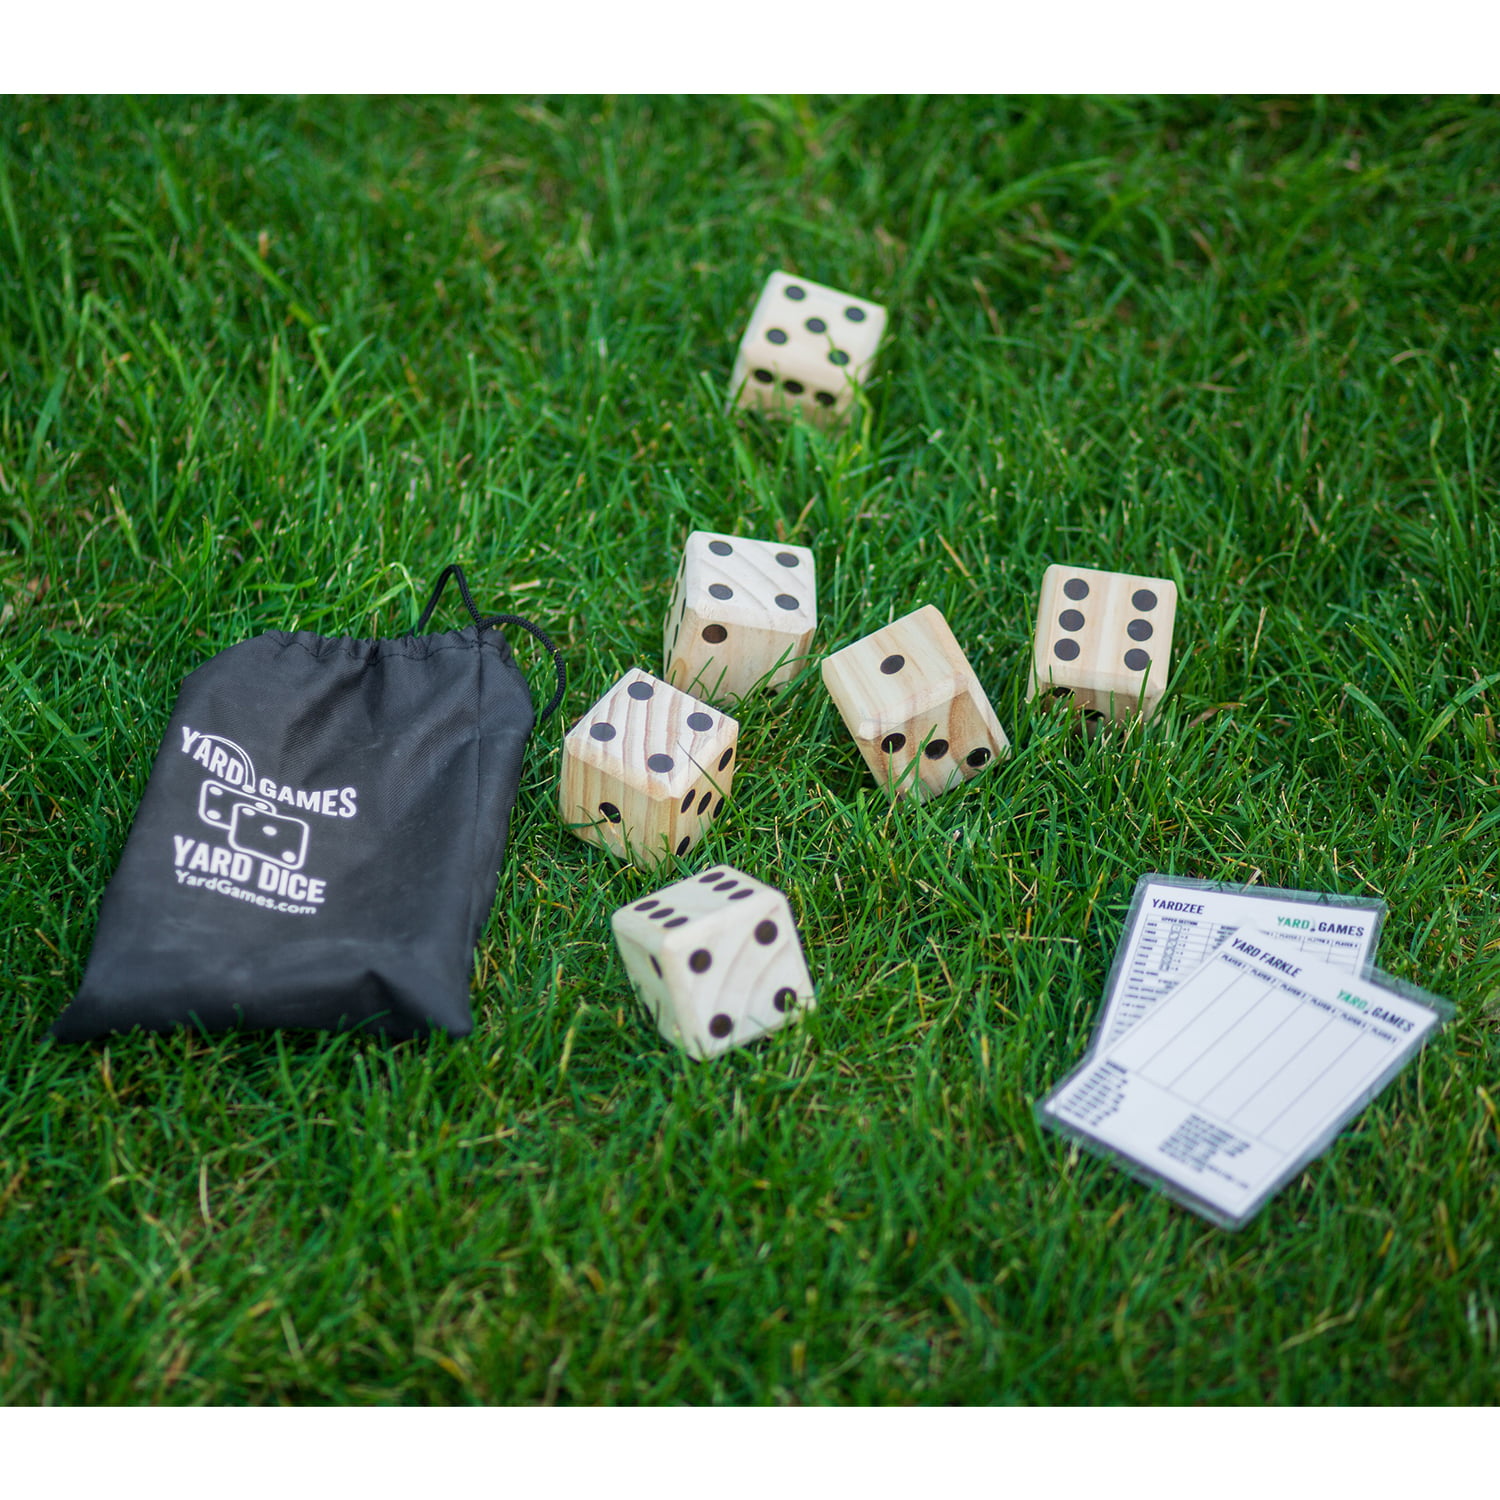 Standard Playing Gaming Dice £1.75 for 3 White, Red or Green 